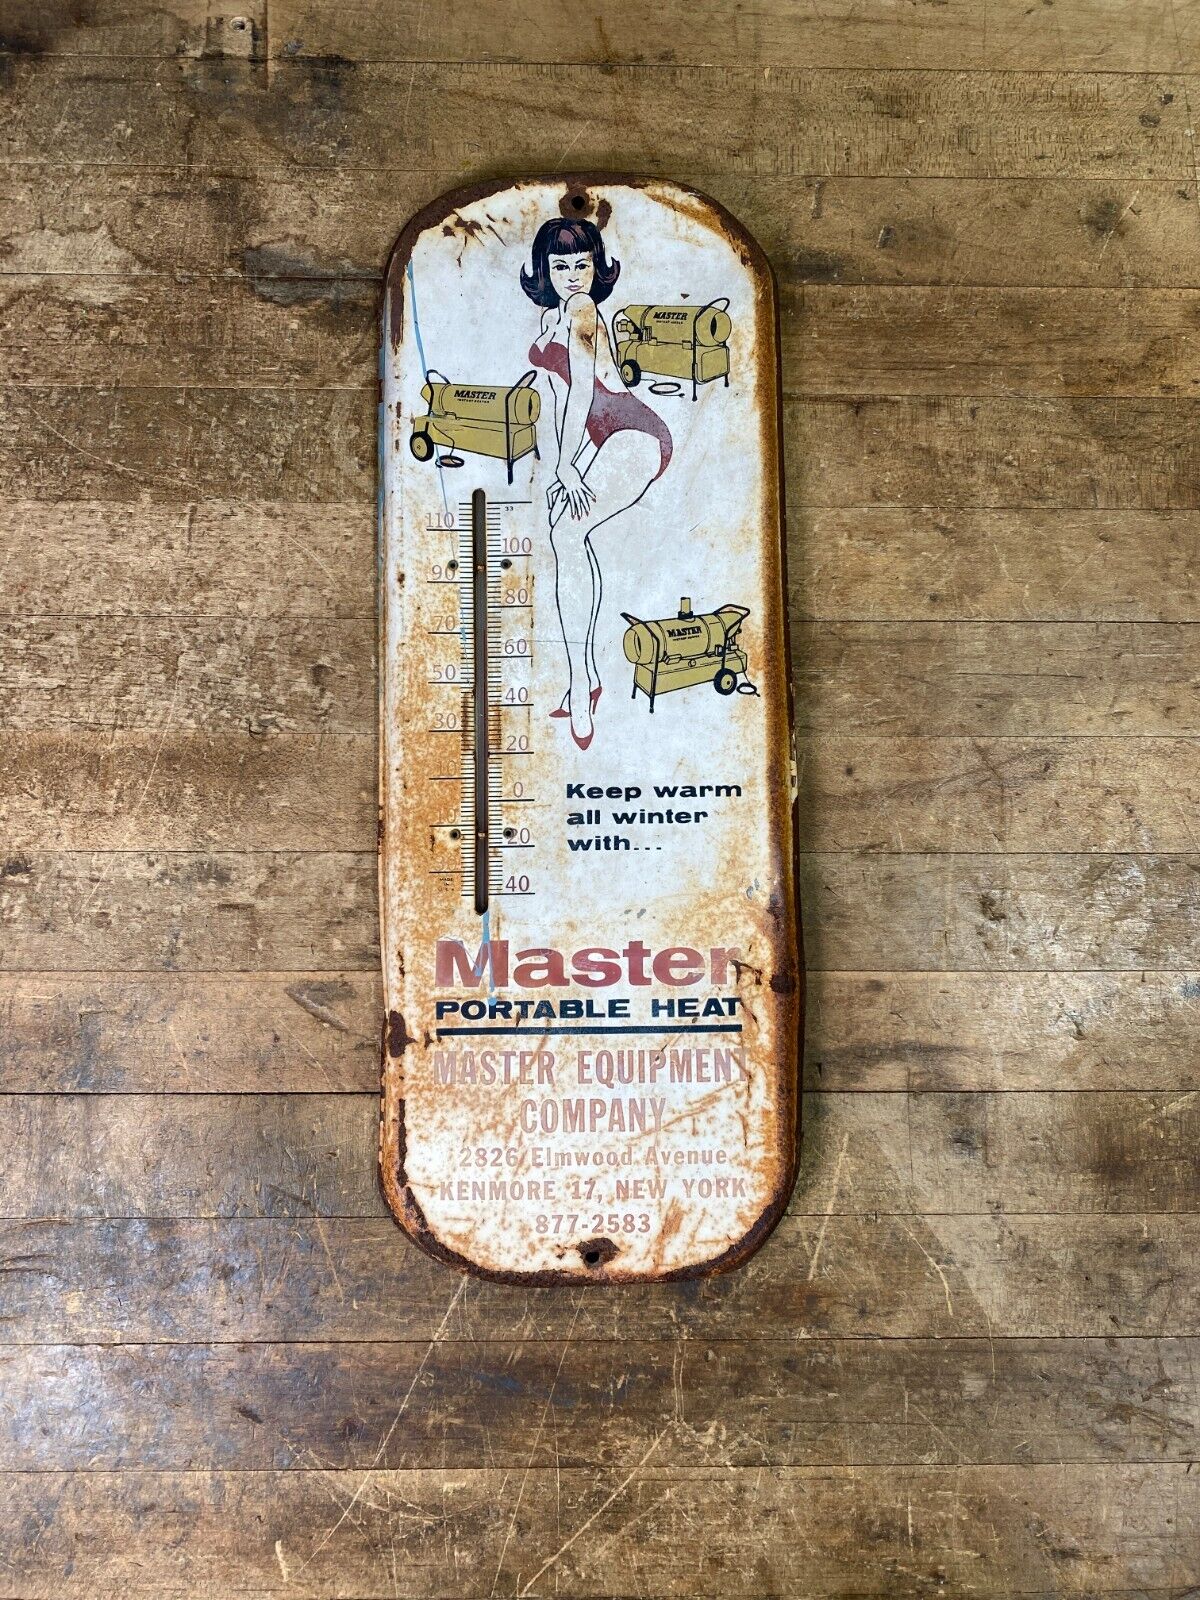 c.1960s Master Equipment Co. Portable Heat Metal Thermometer Pin Up Kenmore, NY